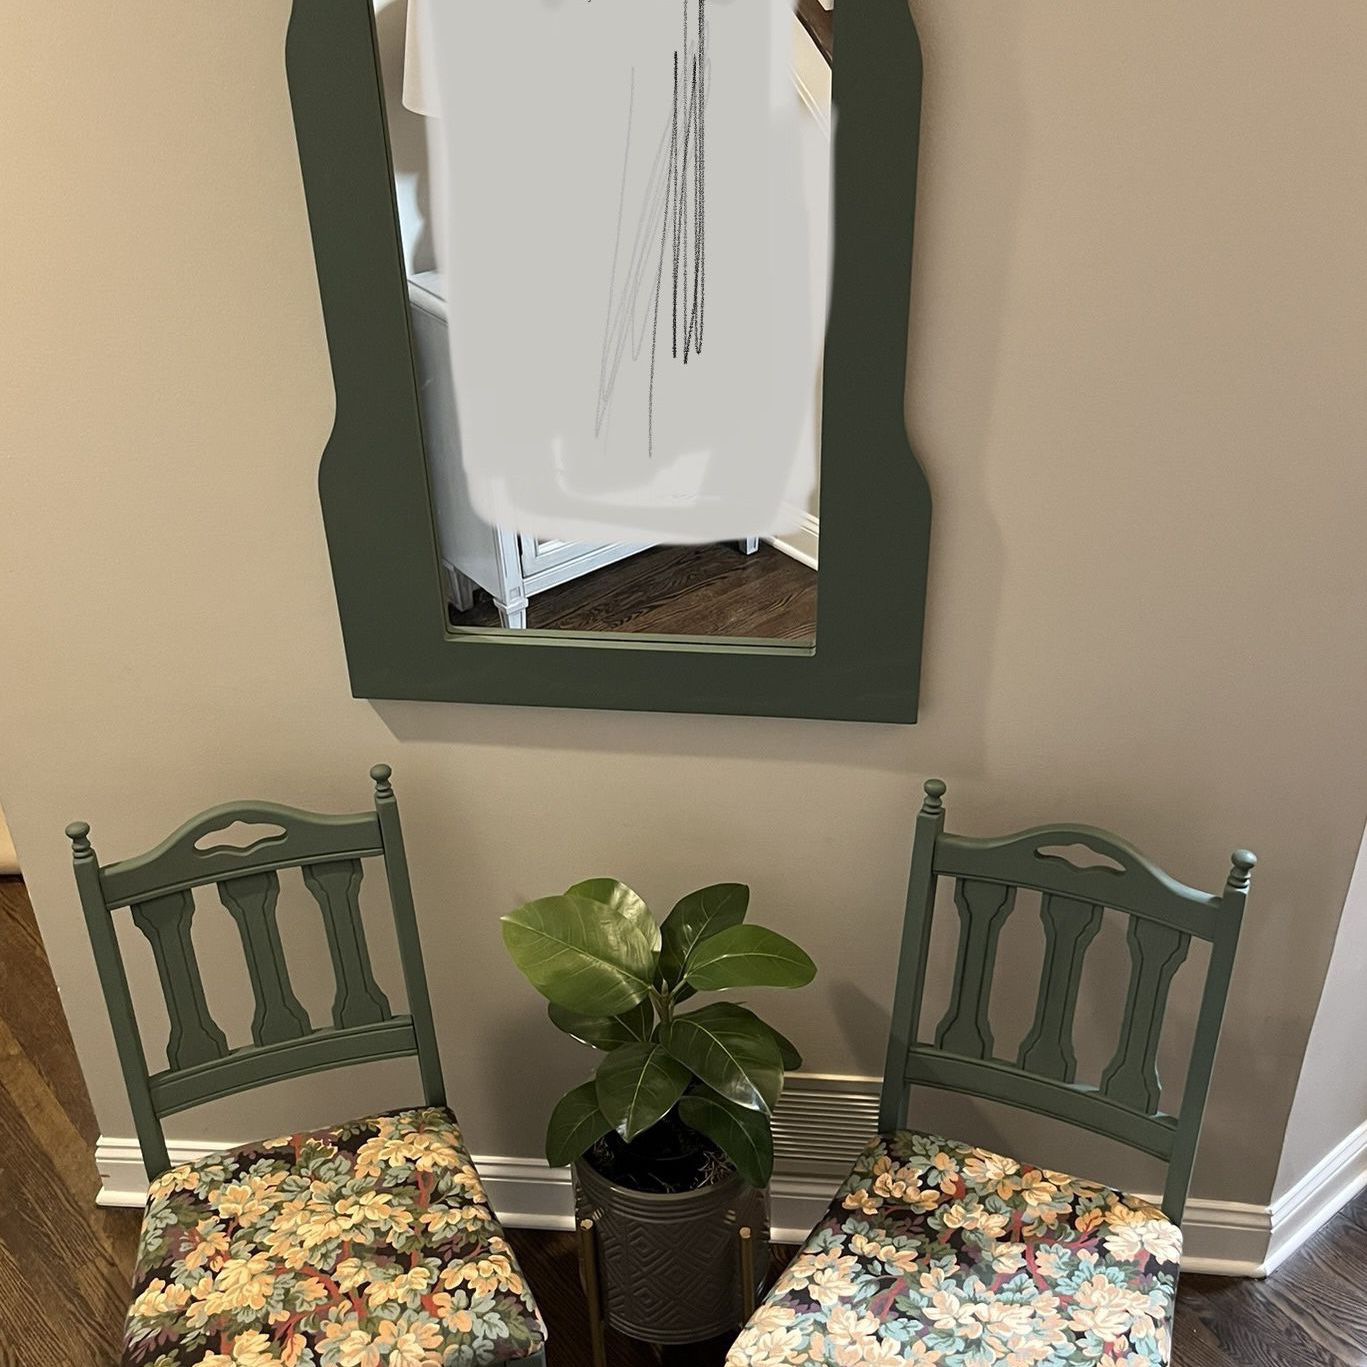 Pair of newly refurbished accent chairs and coordinating mirror 